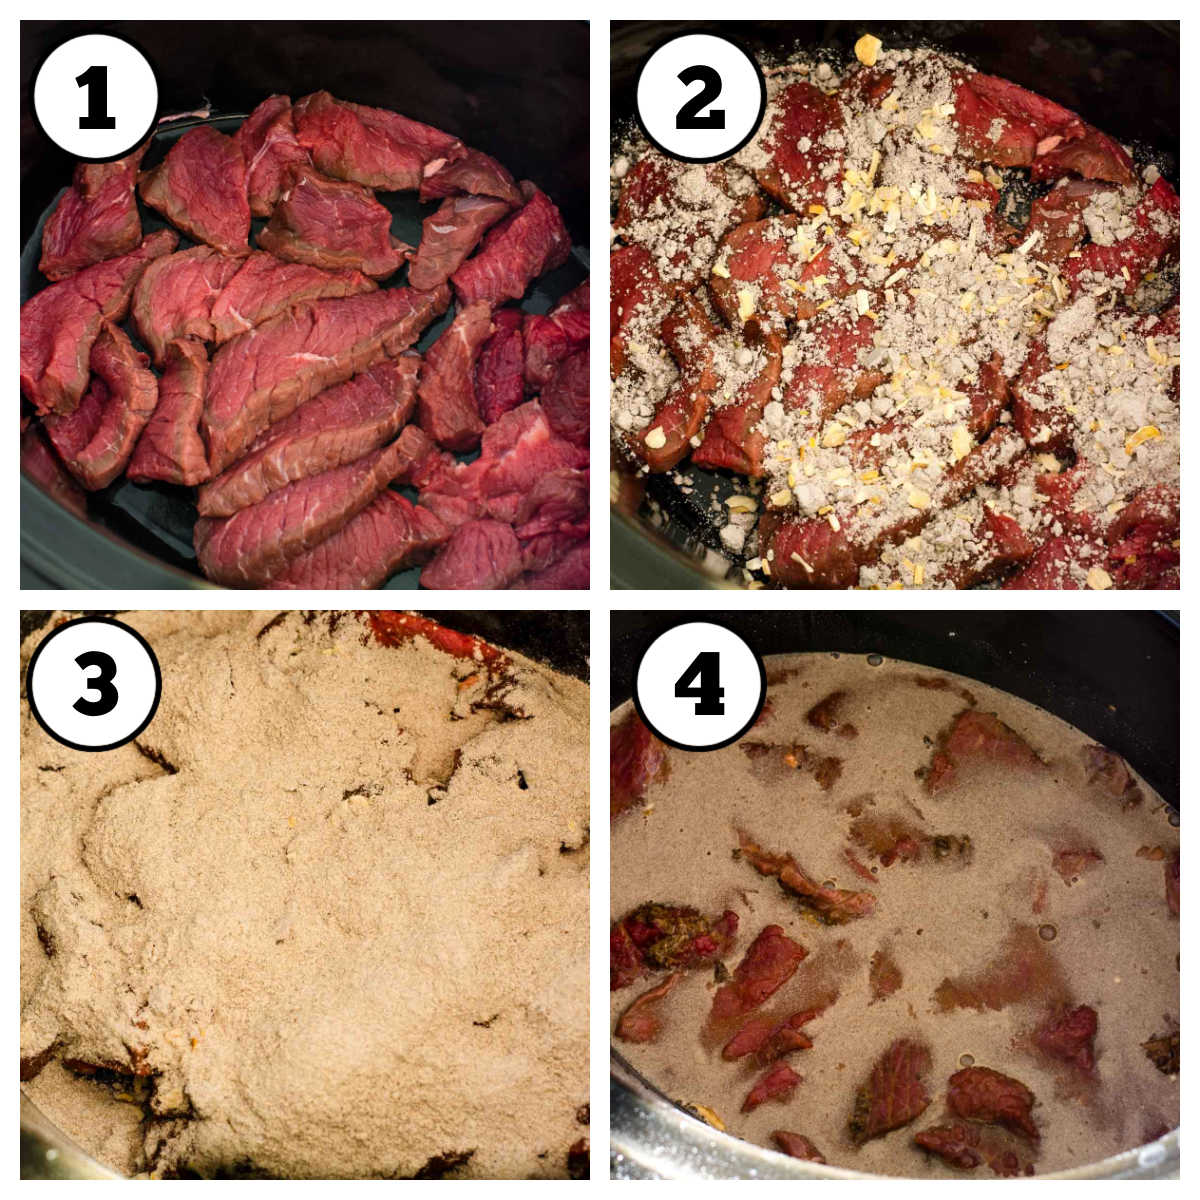 Steps of 4 images showing how to make slow cooker steak.